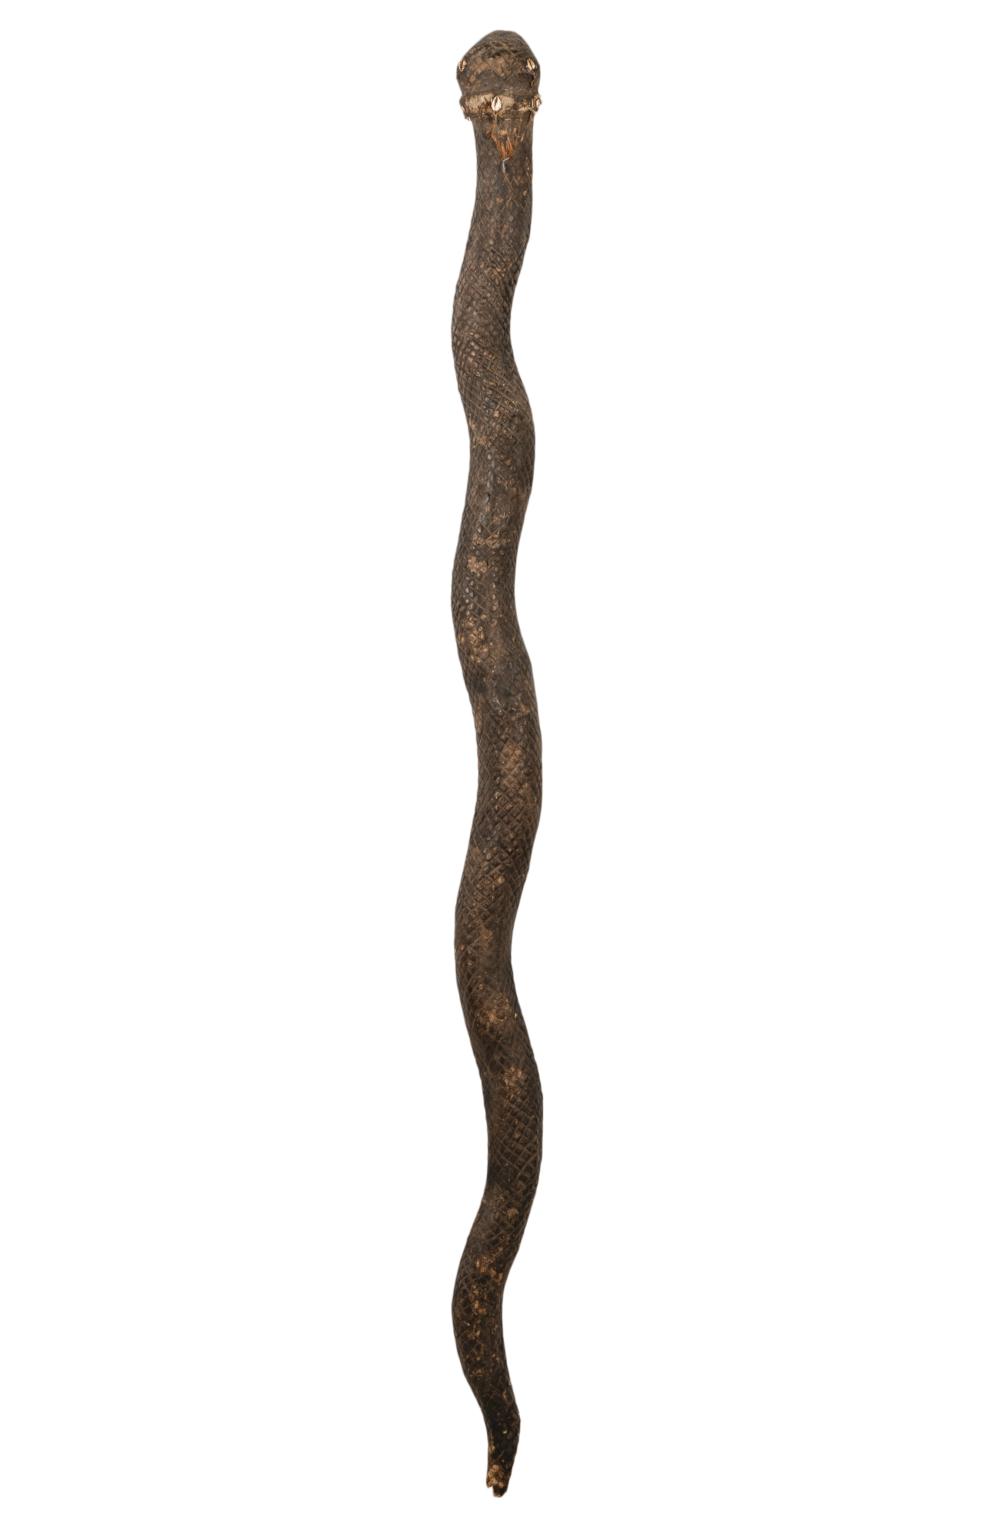 AFRICAN CARVED WOOD SNAKEAfrican